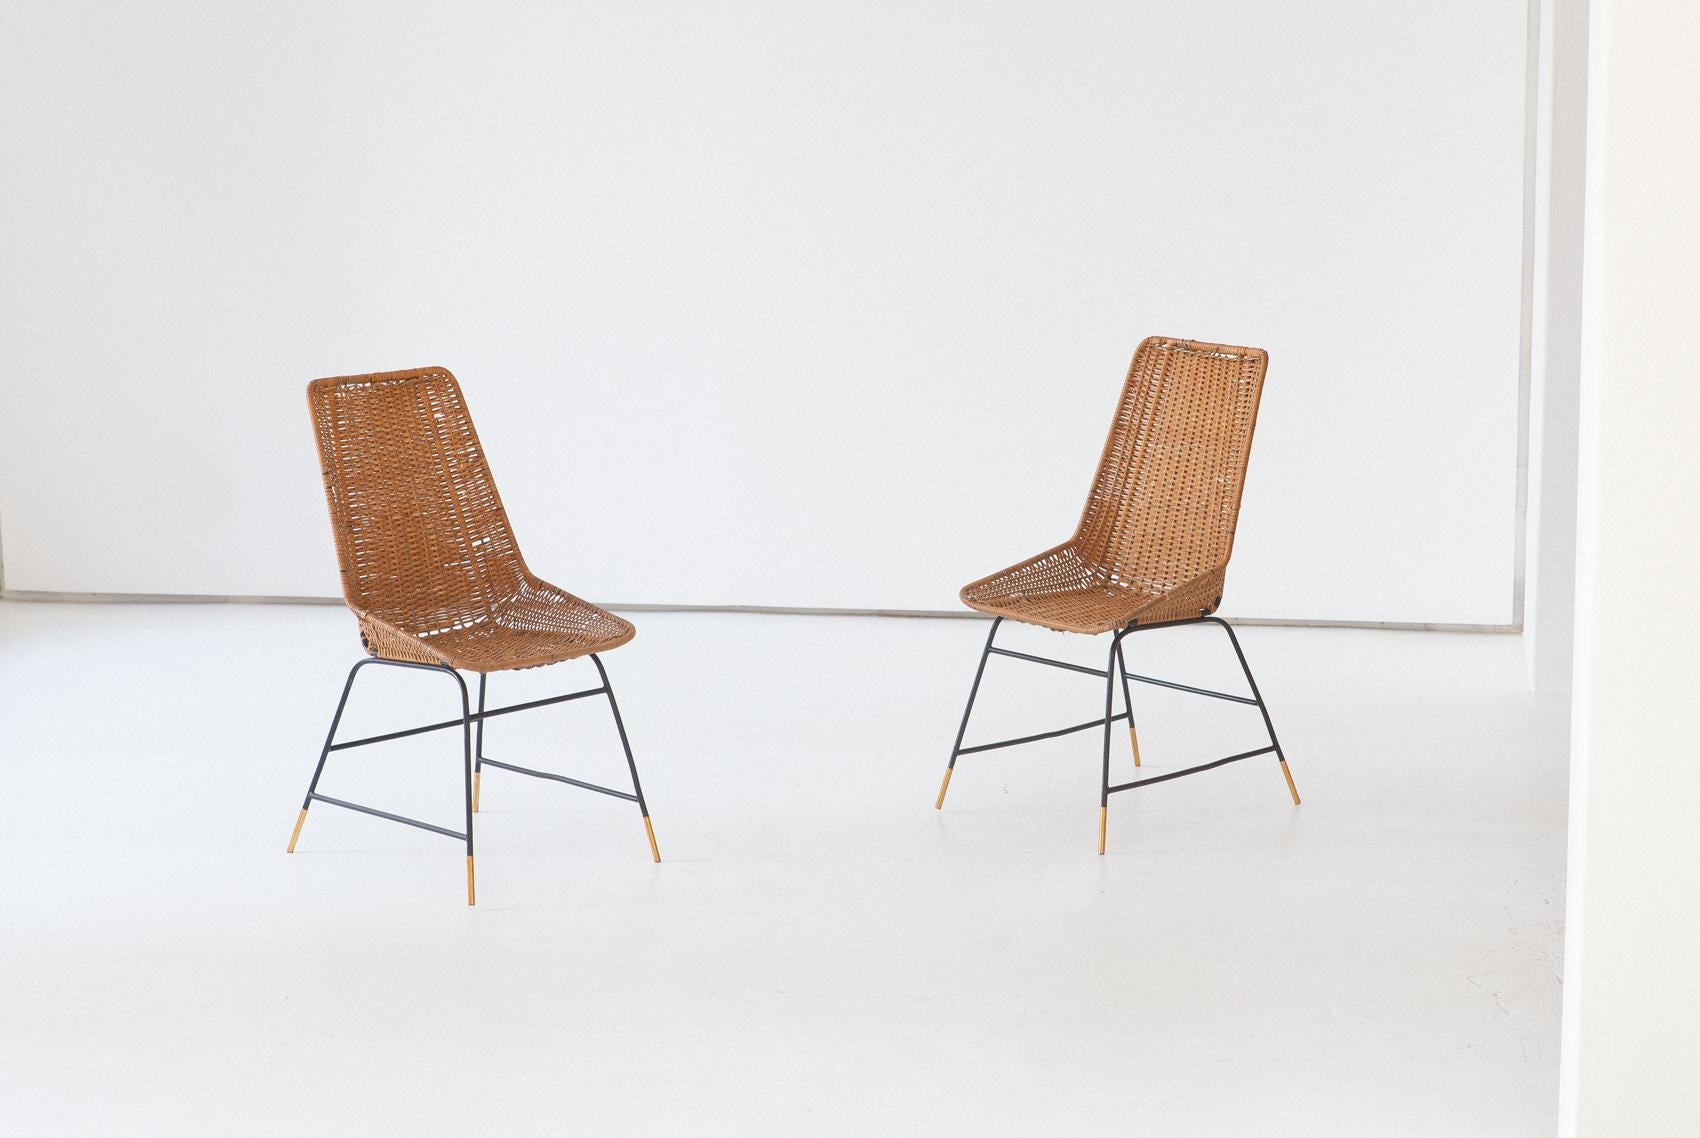 20th Century Pair of Italian Wicker Brass and Black Enameled Iron Chairs, 1950s